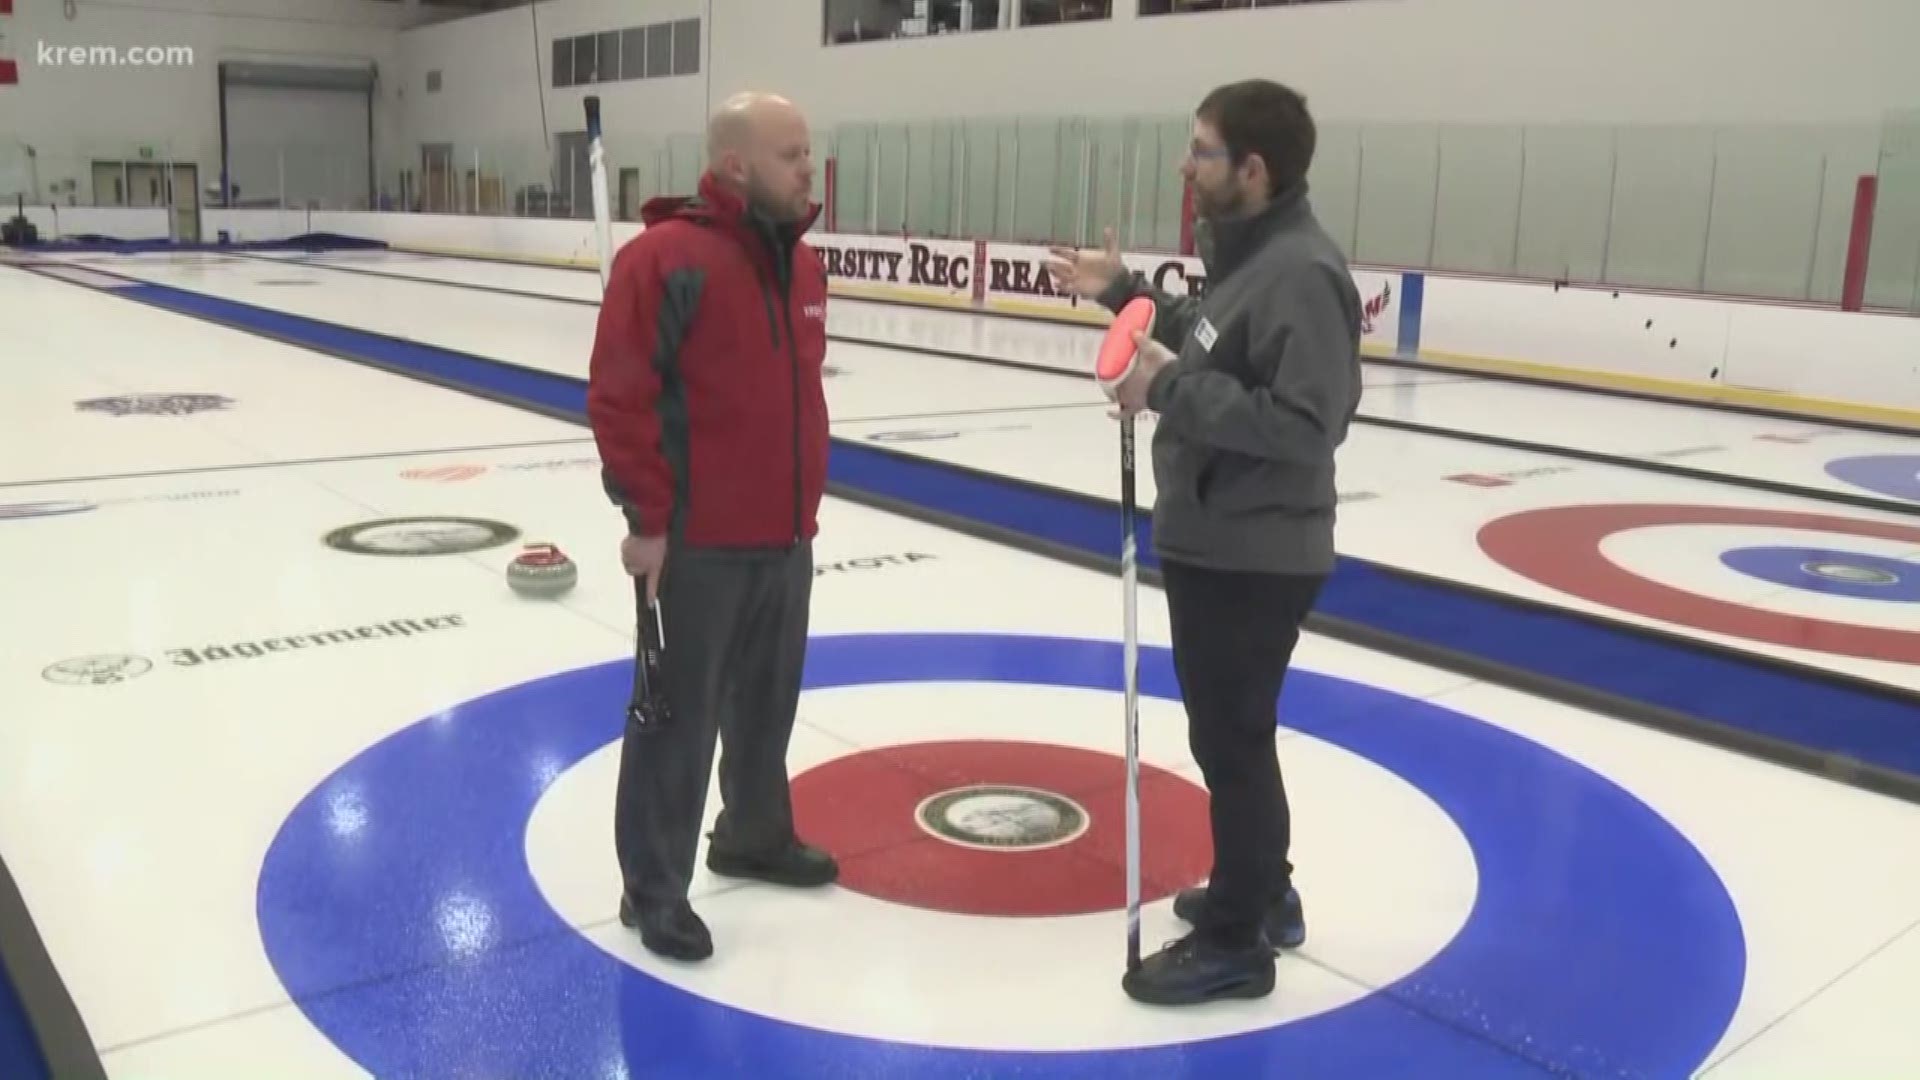 Up With KREM's Joshua Robinson shares some of the most-asked questions about curling in the Inland Northwest, and the 2020 National Curling Championships